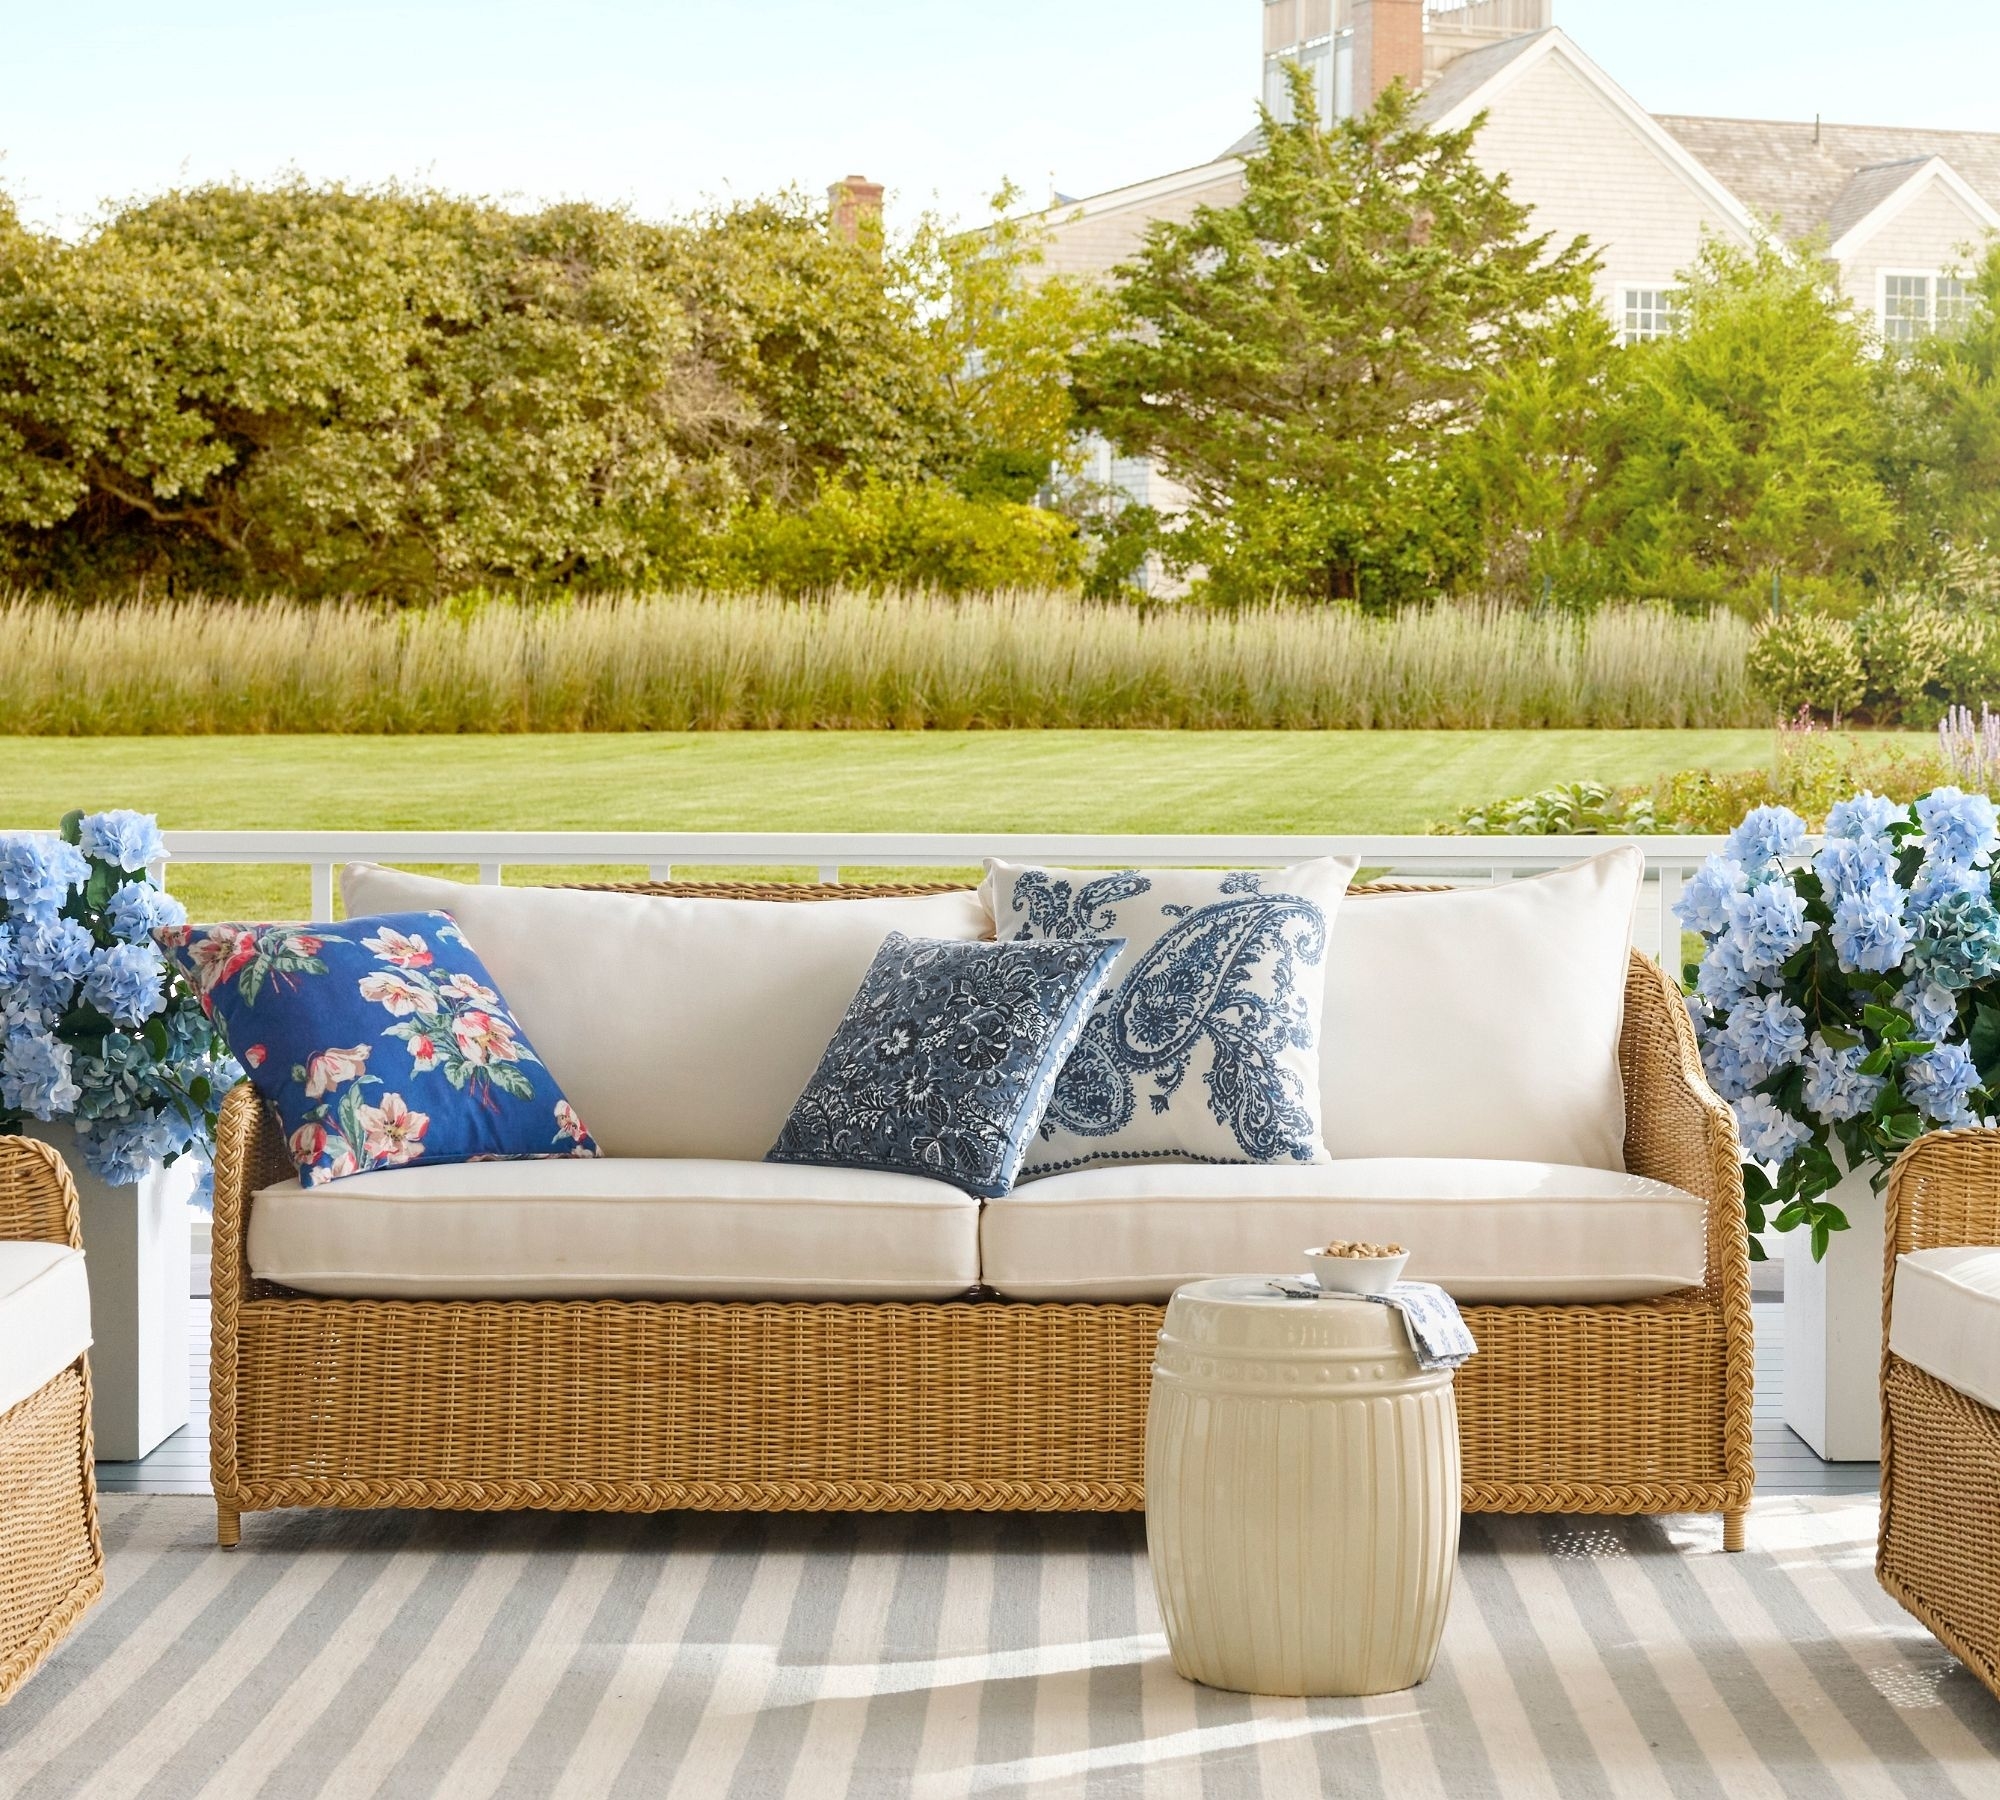 Outdoor furniture setting with a wicker sofa, decorative pillows, and a small table, on a striped rug with greenery in the background